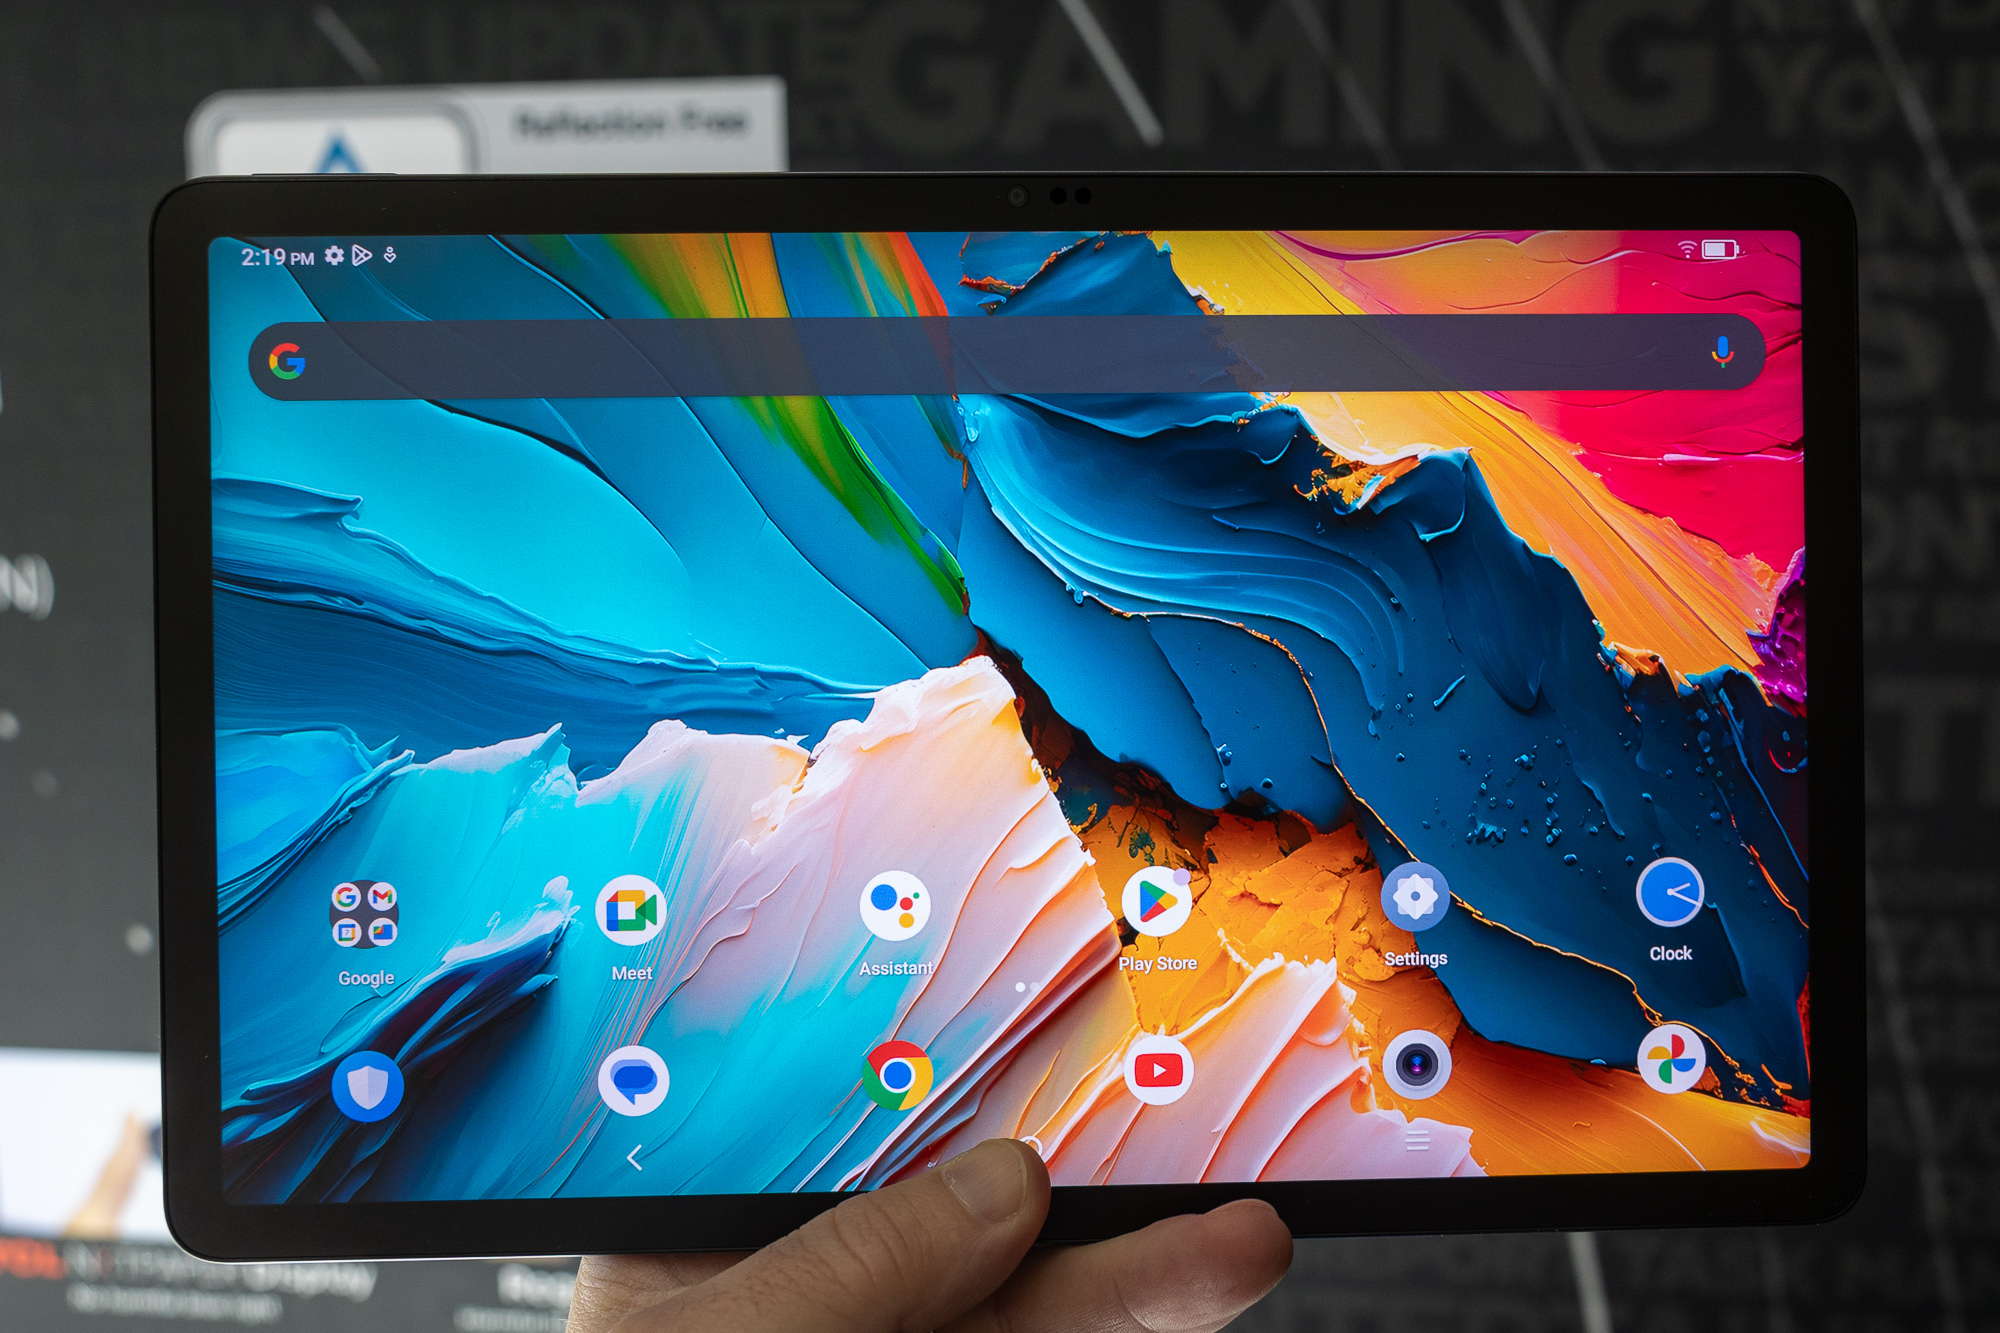 You should pay attention to TCL's two new Android tablets